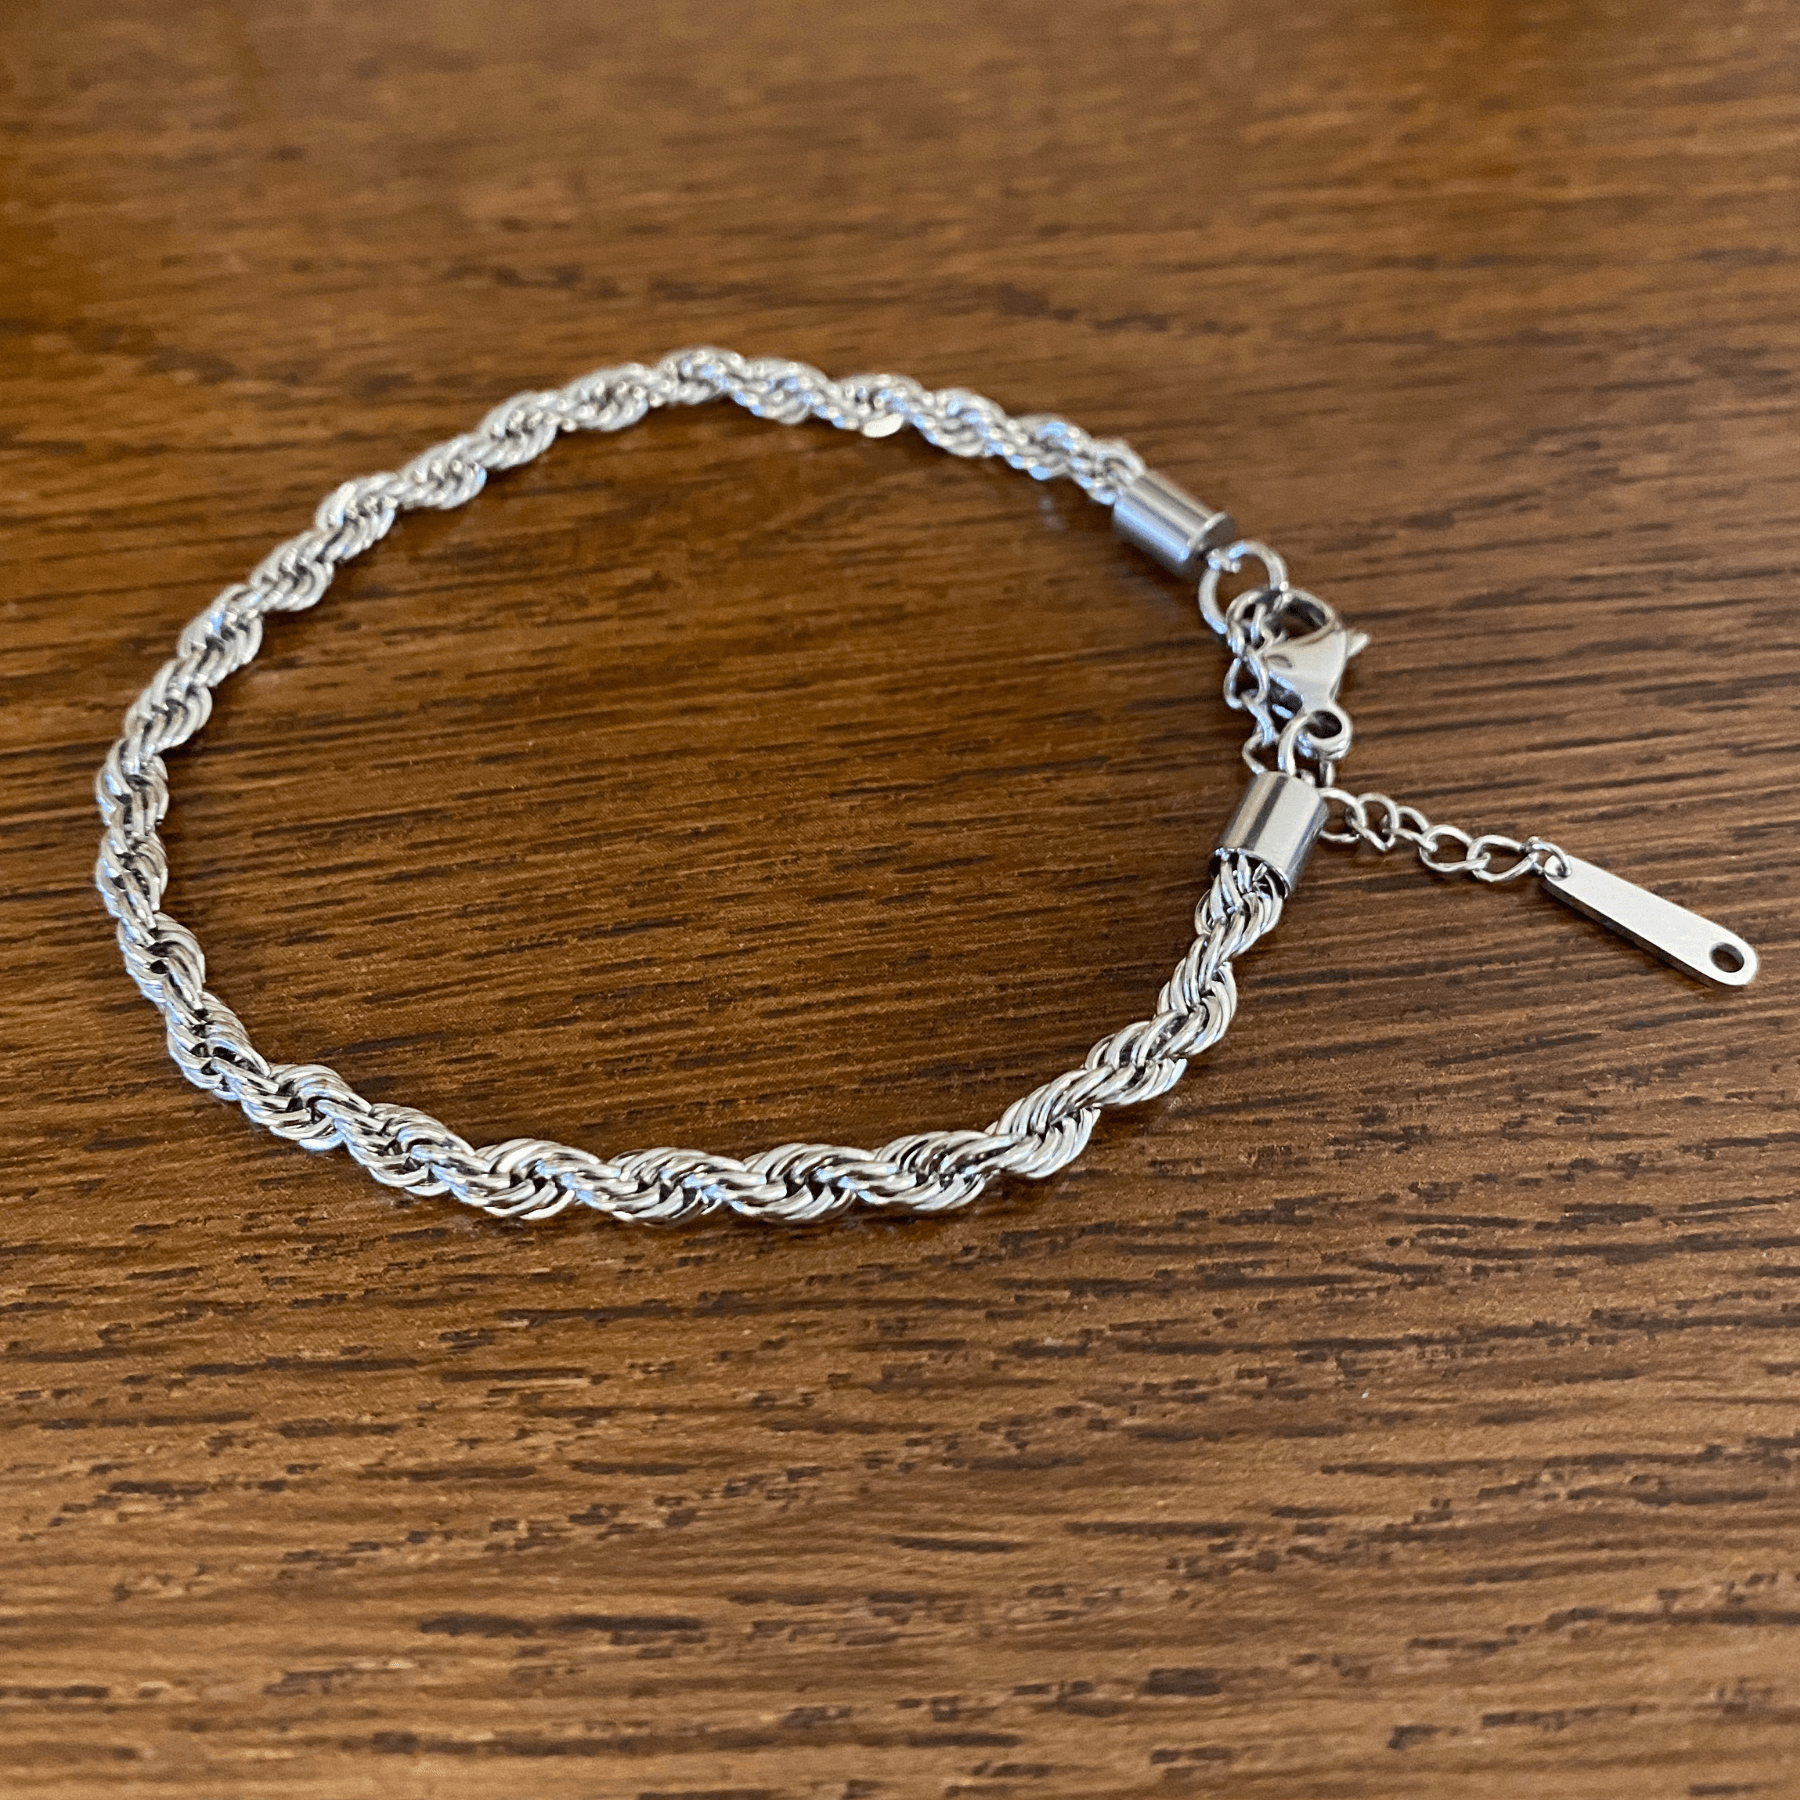 Silver Classic Braided Rope Anklet/Bracelet - JACK